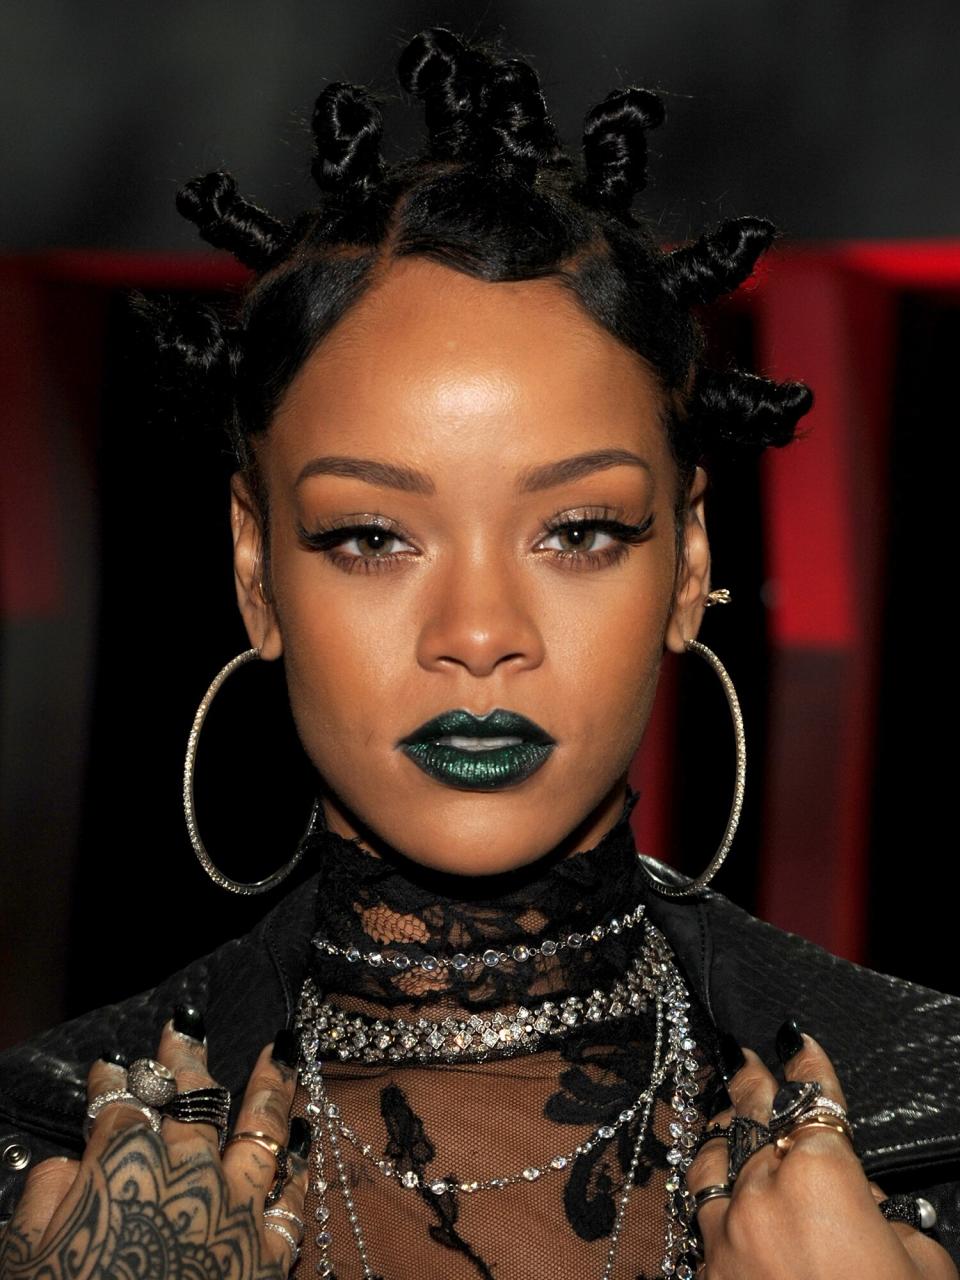 Rihanna in the audience at the 2014 iHeartRadio Music Awards held at The Shrine Auditorium on May 1, 2014 in Los Angeles, California